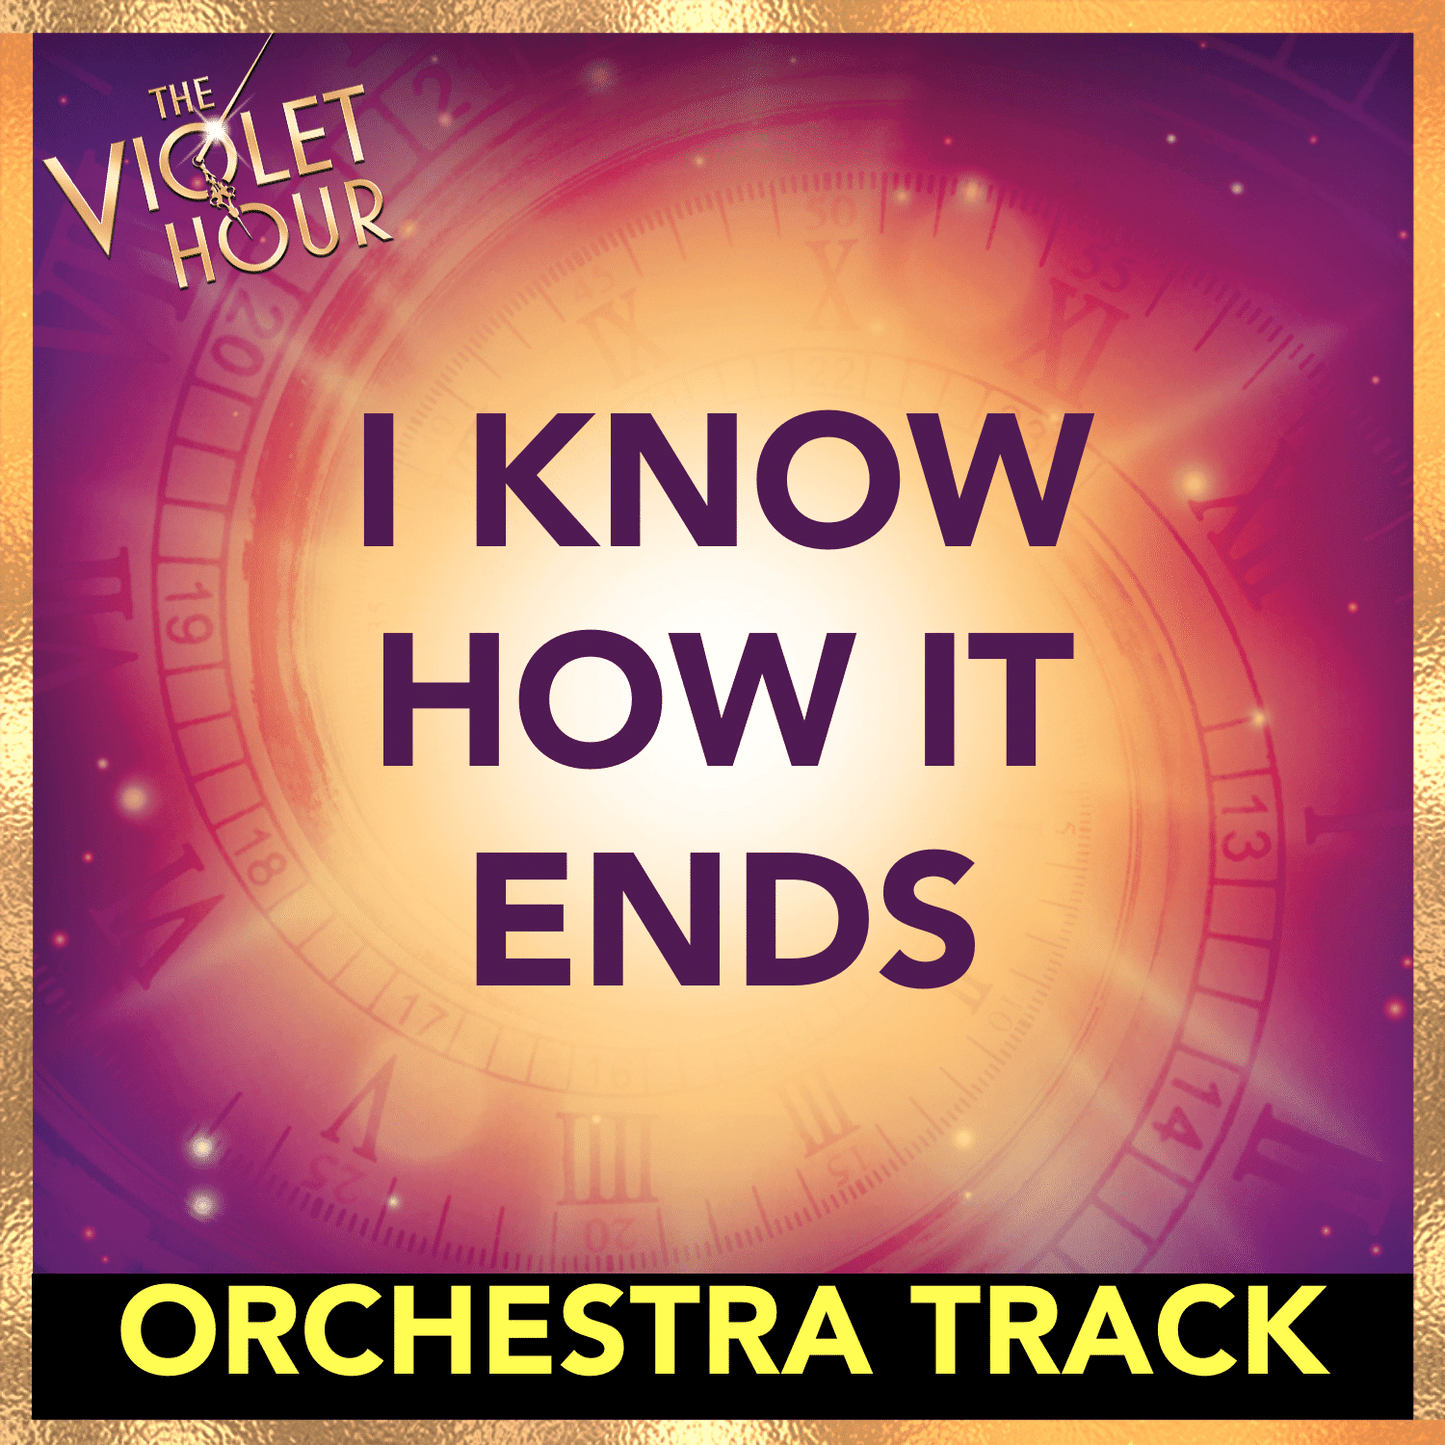 I KNOW HOW IT ENDS (Orchestra Track)